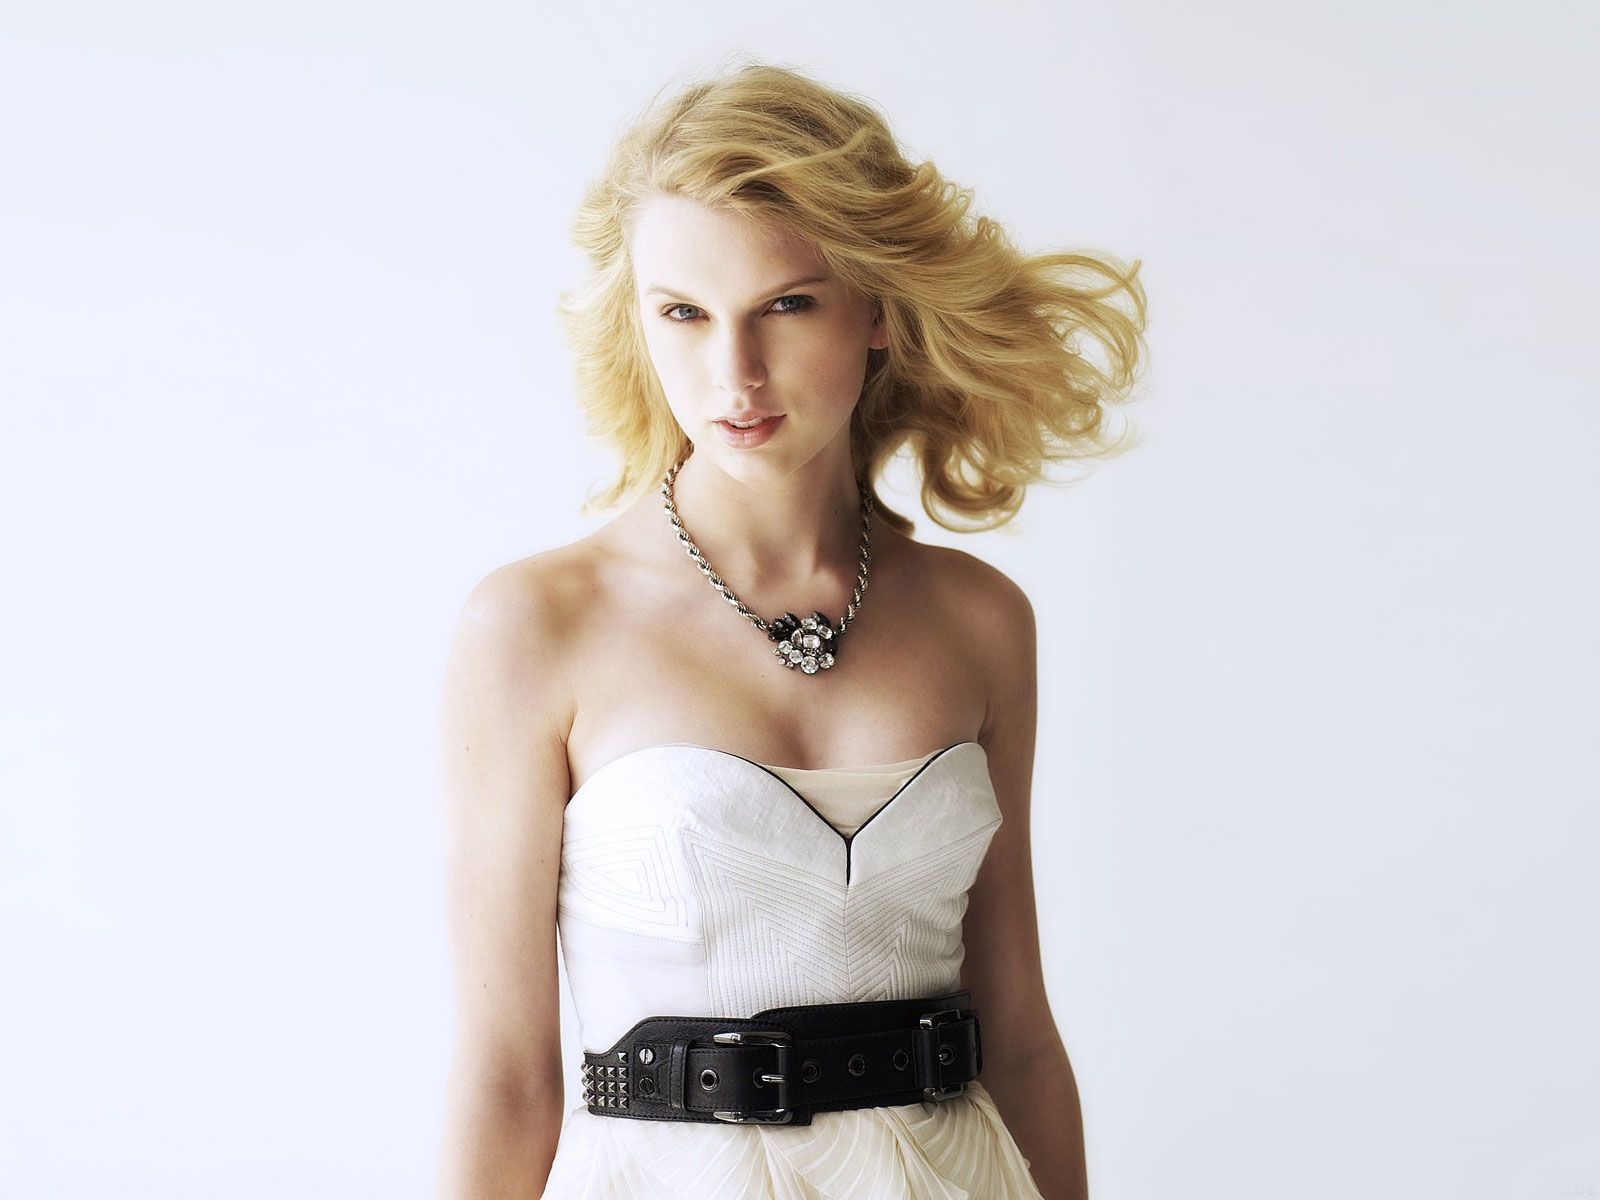 Taylor Swift 4 Wallpapers | HD Wallpapers